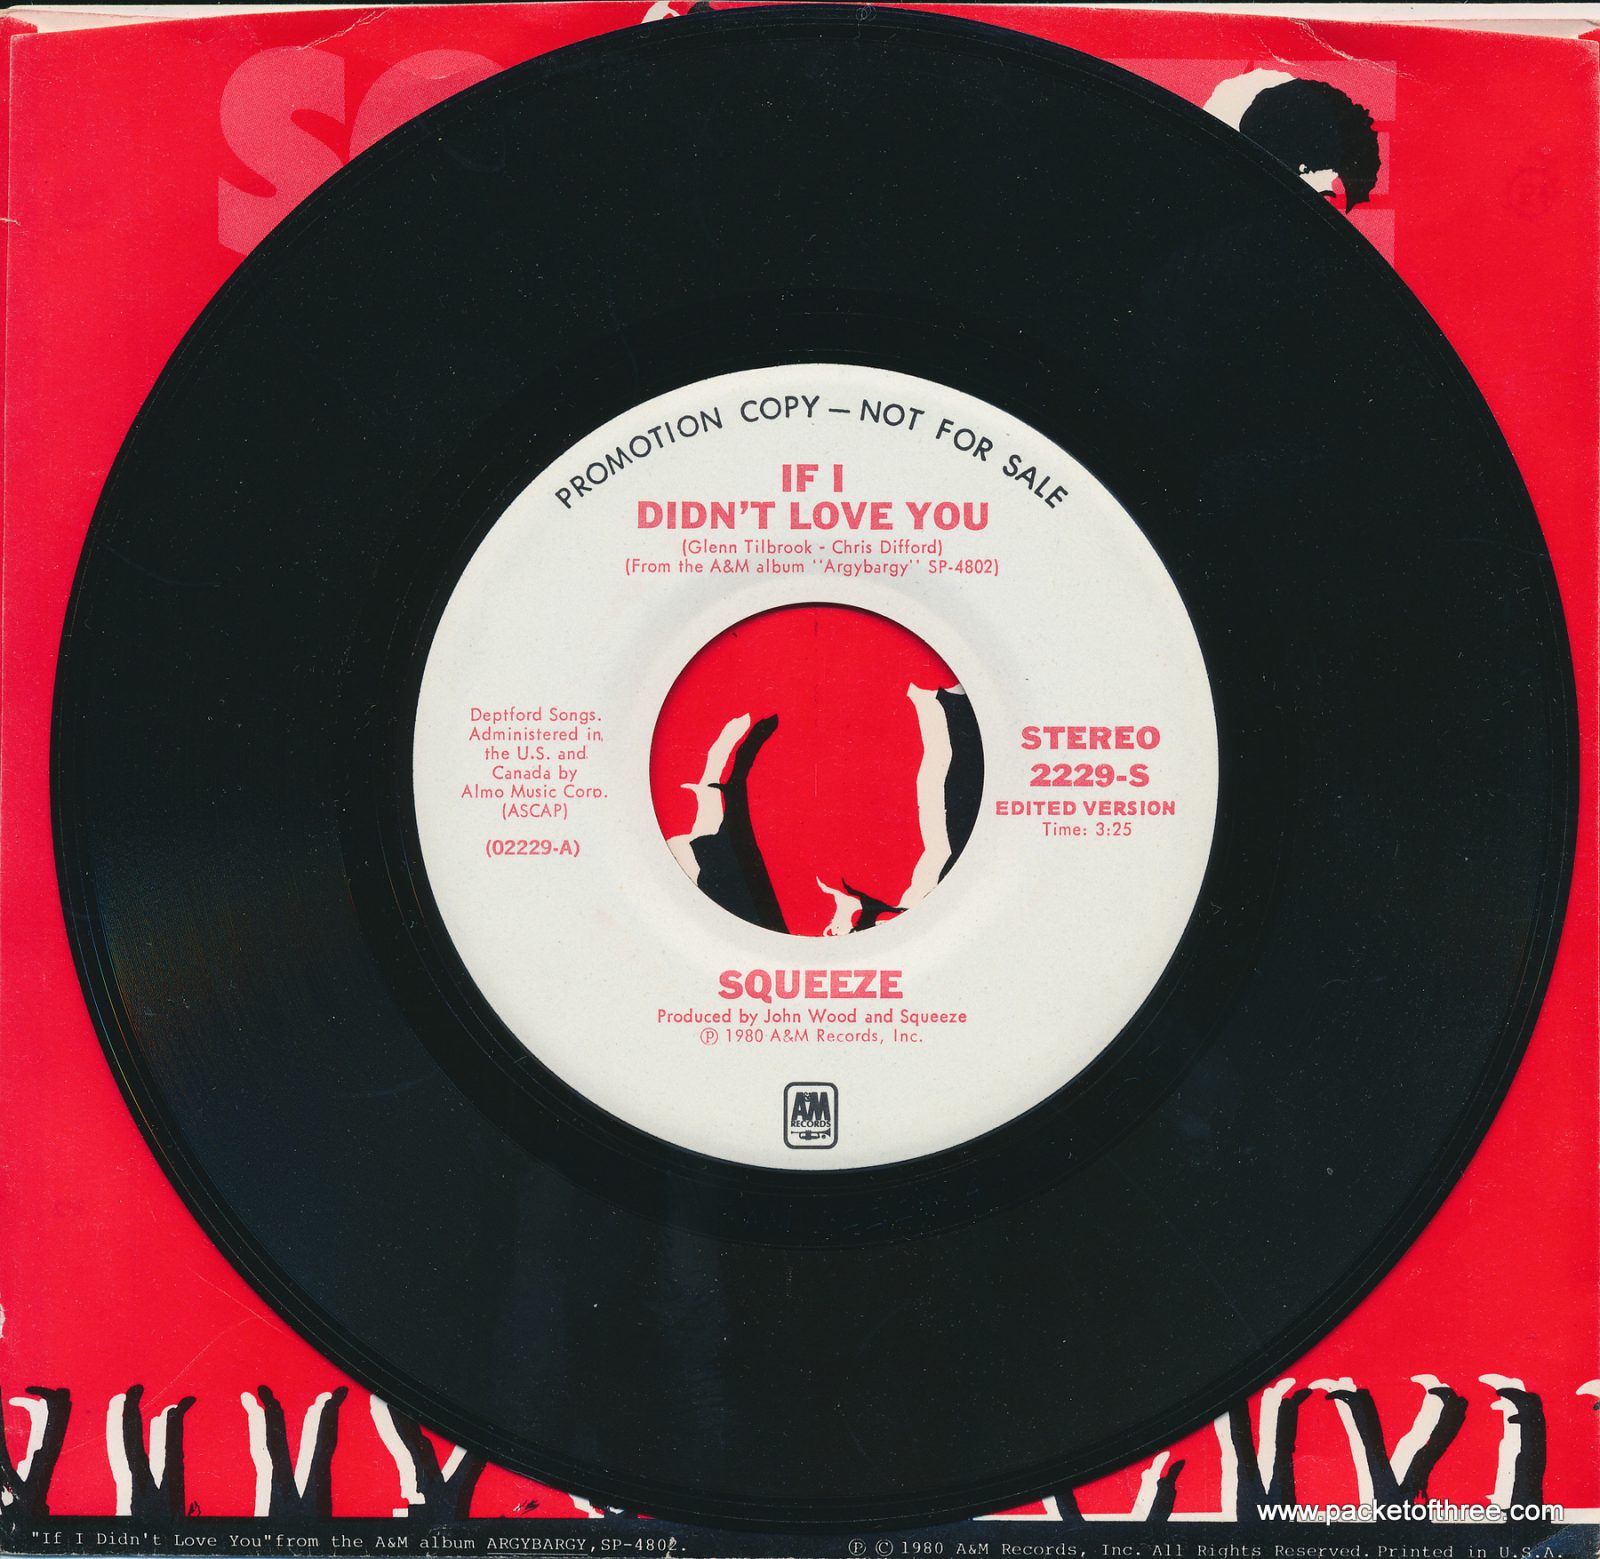 If I Didn't Love You - USA - 7" - picture sleeve - stereo/stereo promotional copy